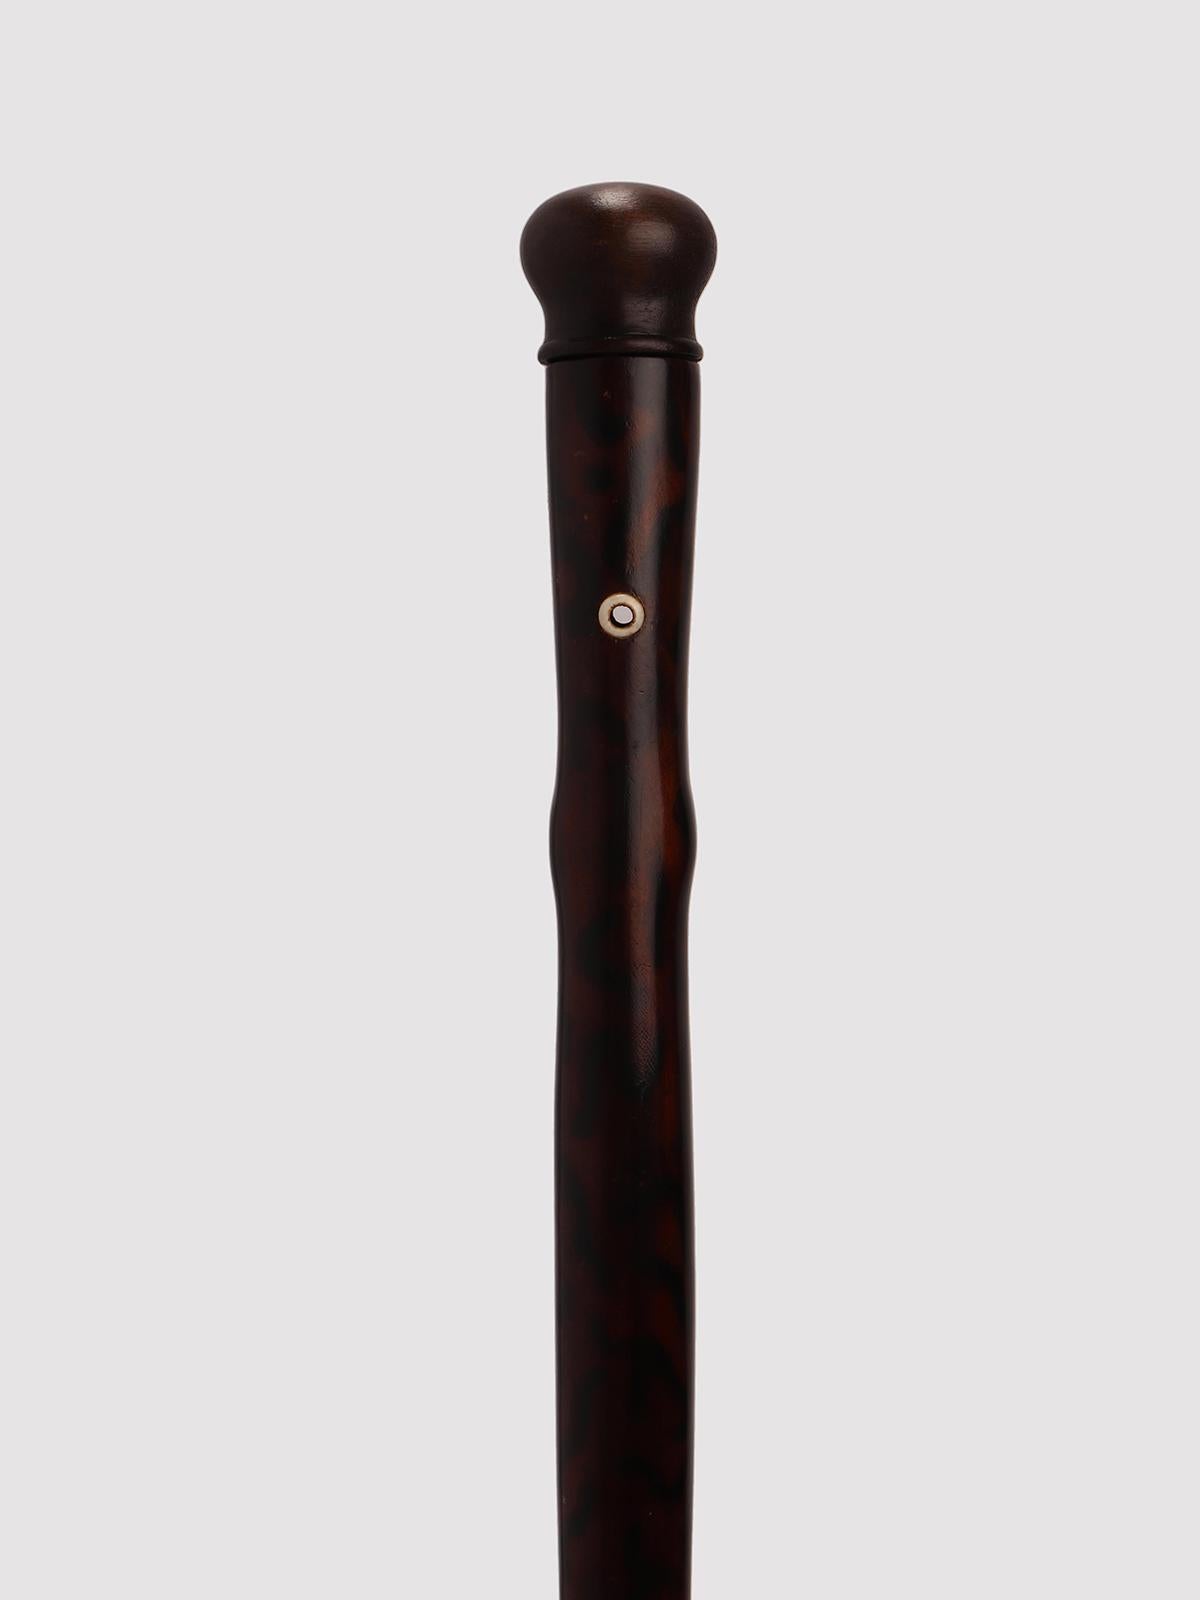 Very rare gadget-System walking stick: stick with the function of a music instrument, a flute. Painted fruitwood shaft, wooden handle. Inside the shaft is hollow, and holes and keys allow to play music once the handle is taken apart. Ferrule made